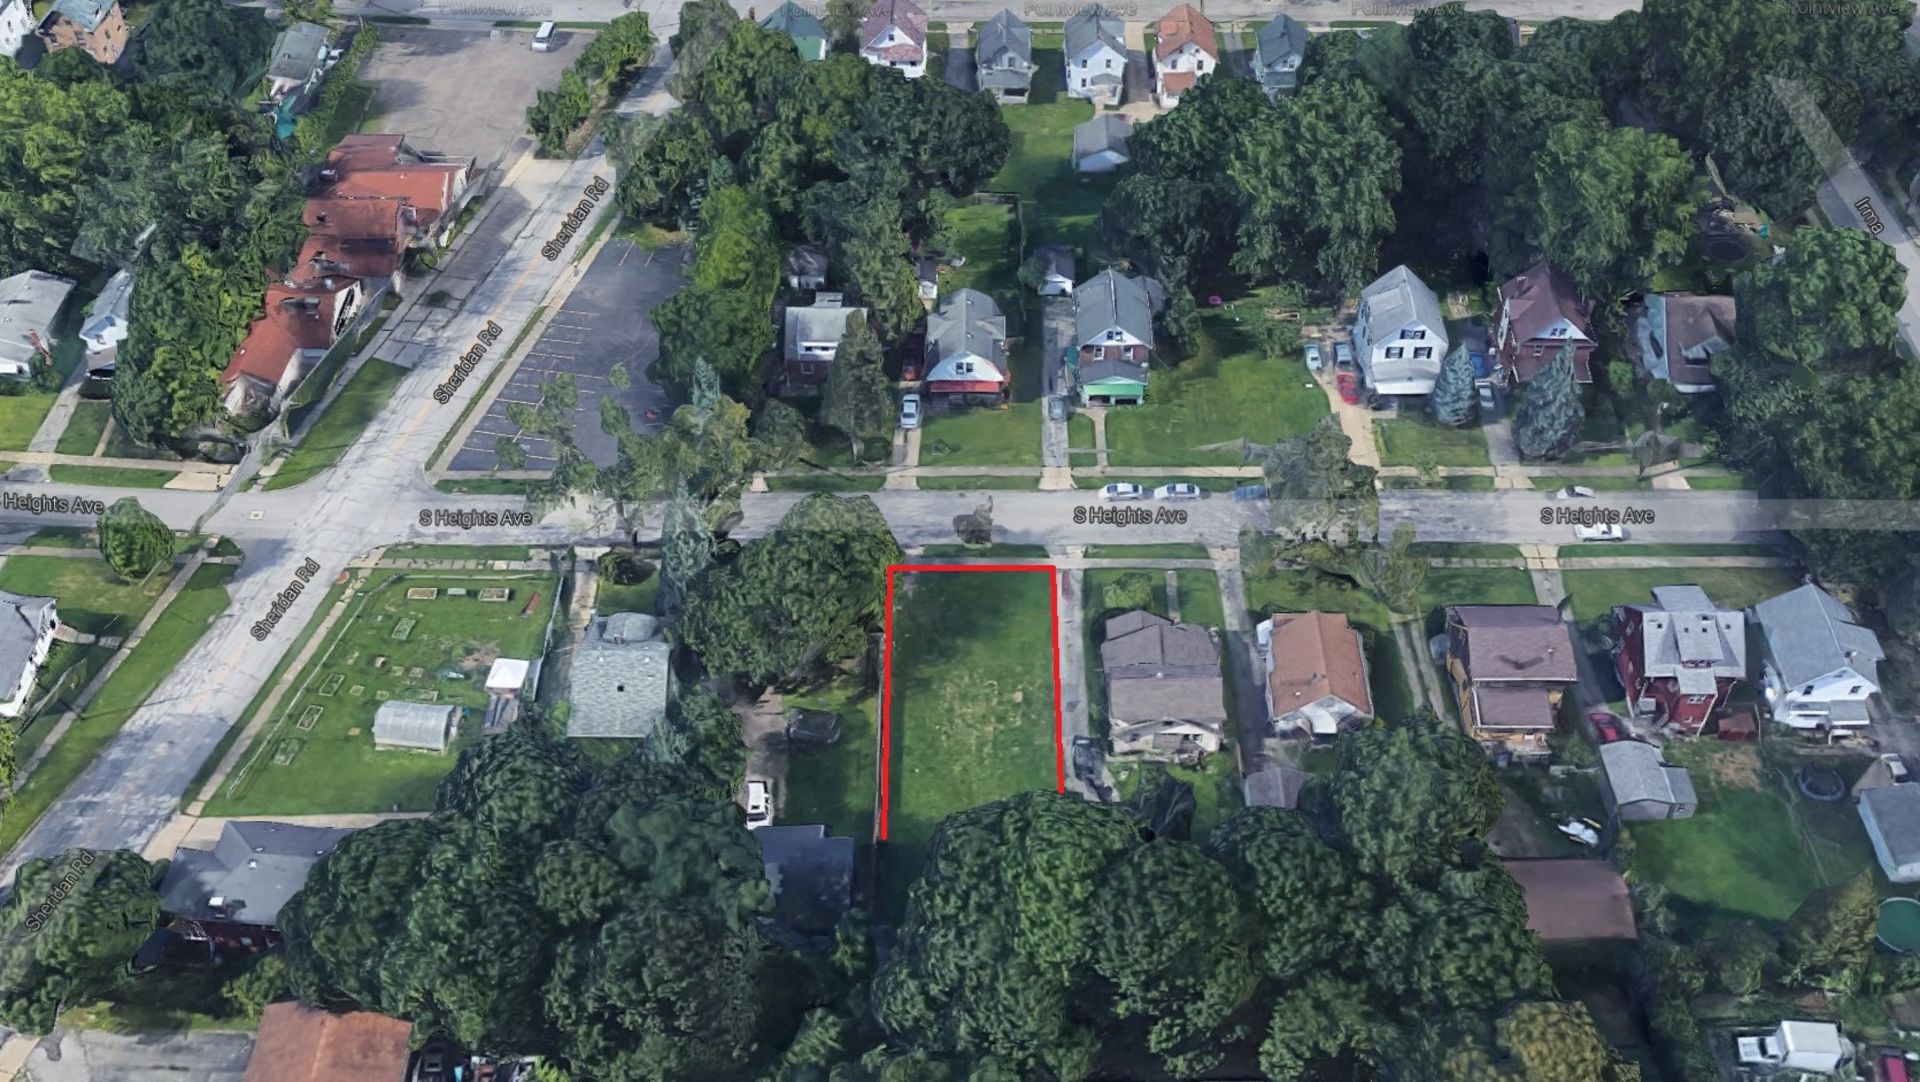 PLOT OF LAND AT 1921 S HEIGHTS AVENUE, YOUNGSTOWN, OHIO ADDRESS: 1921 S HEIGHTS AVENUE, - Image 2 of 7